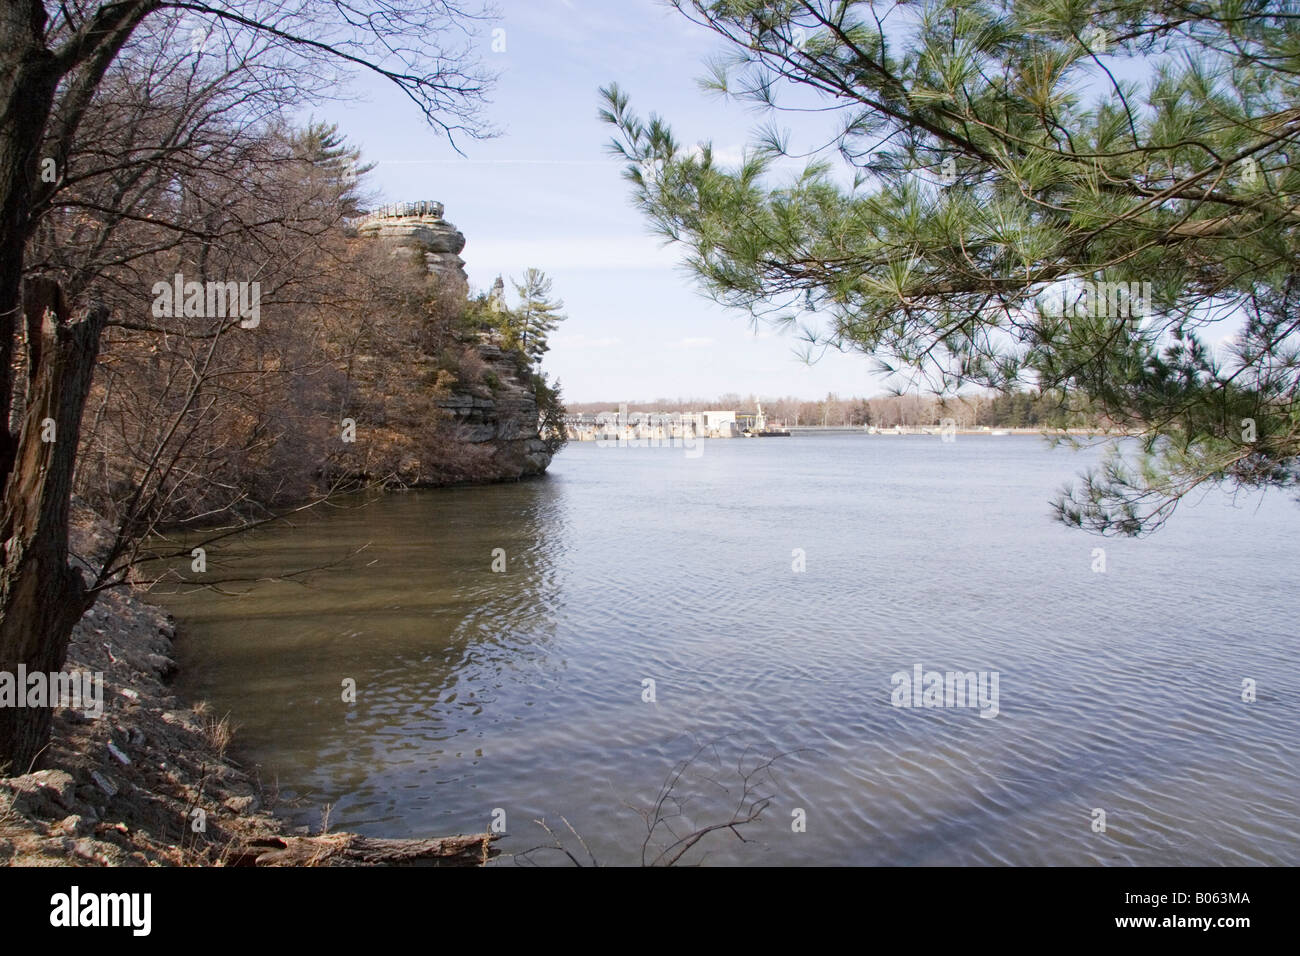 Starved Rock State Park. Illinois River. Foto Stock